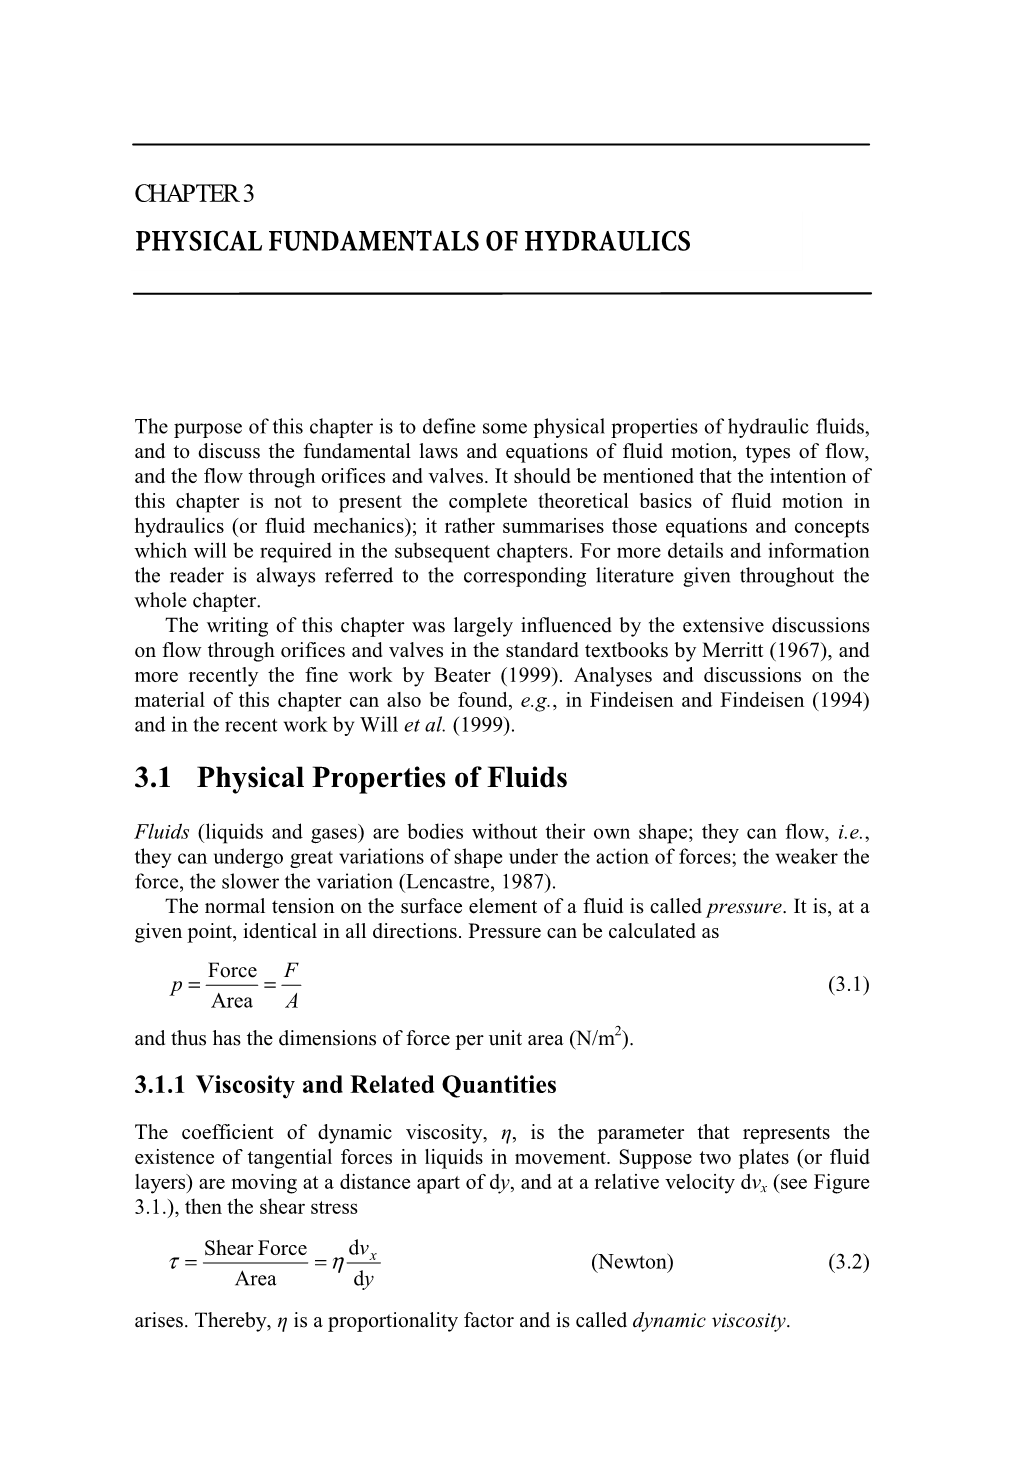 3.1 Physical Properties of Fluids PHYSICAL FUNDAMENTALS OF